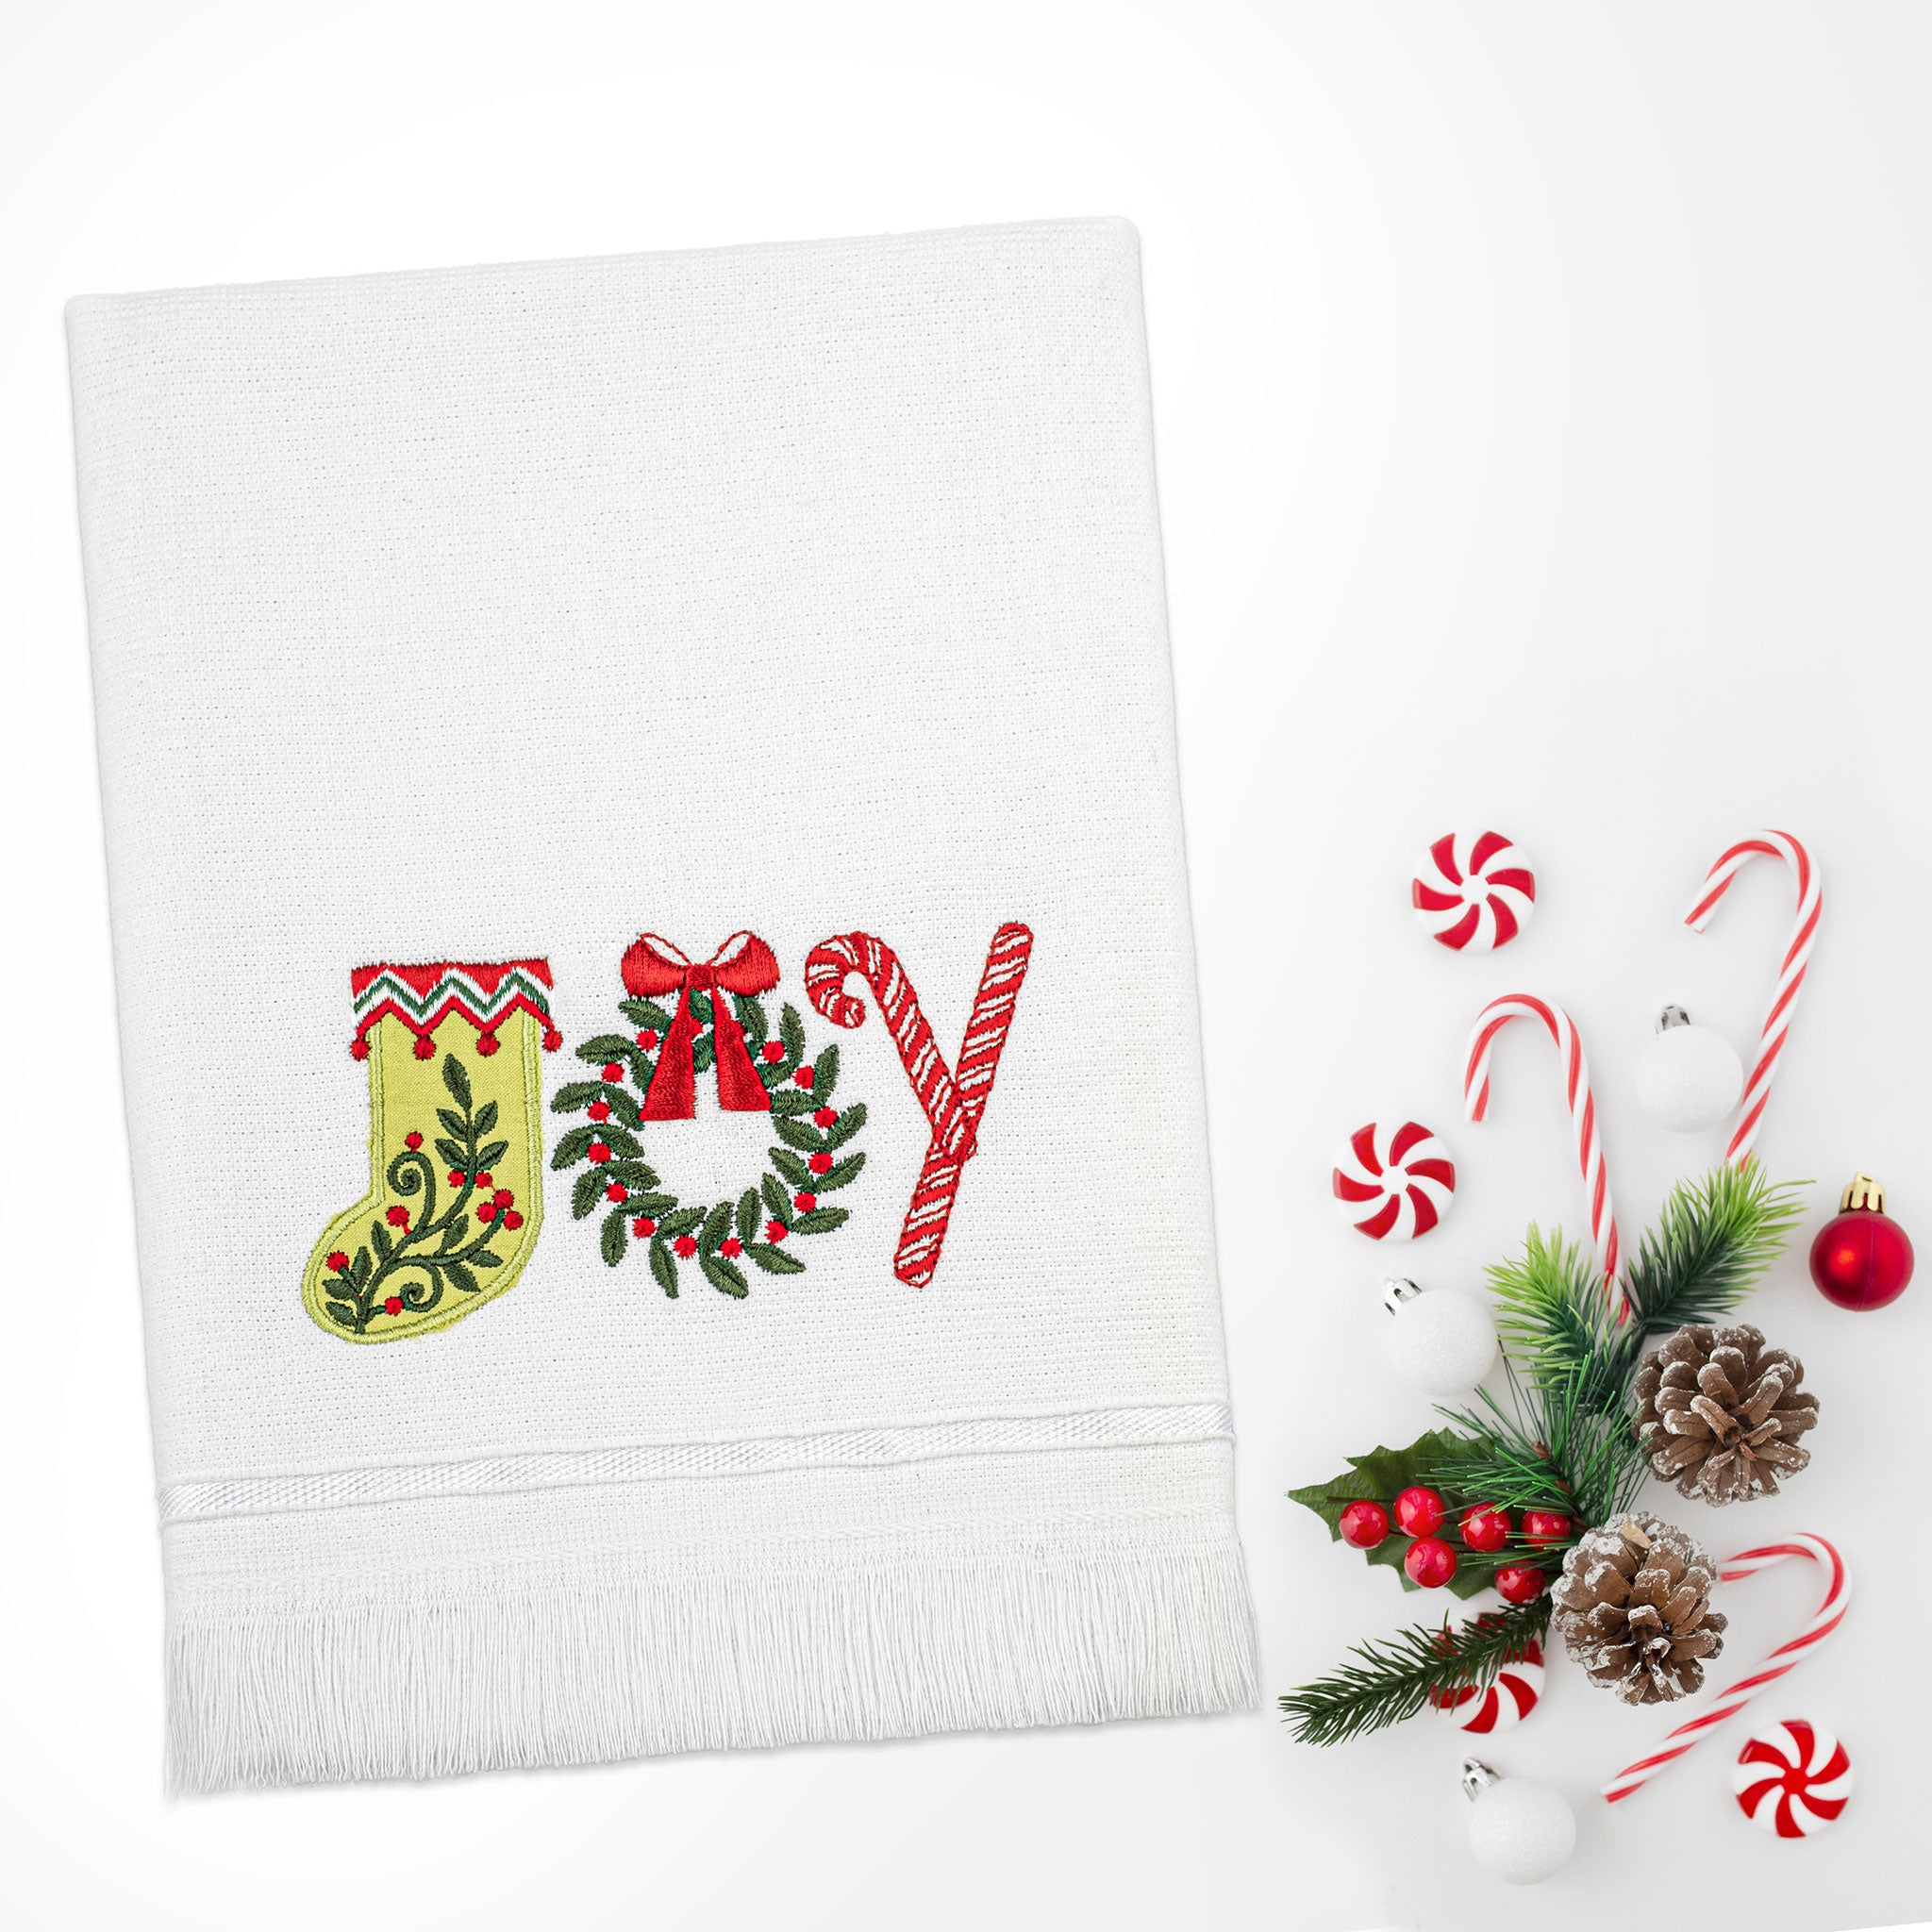  American Soft Linen - Christmas Towels Set 2 Packed Embroidered Turkish Cotton Hand Towels - Joy Lettering - 6